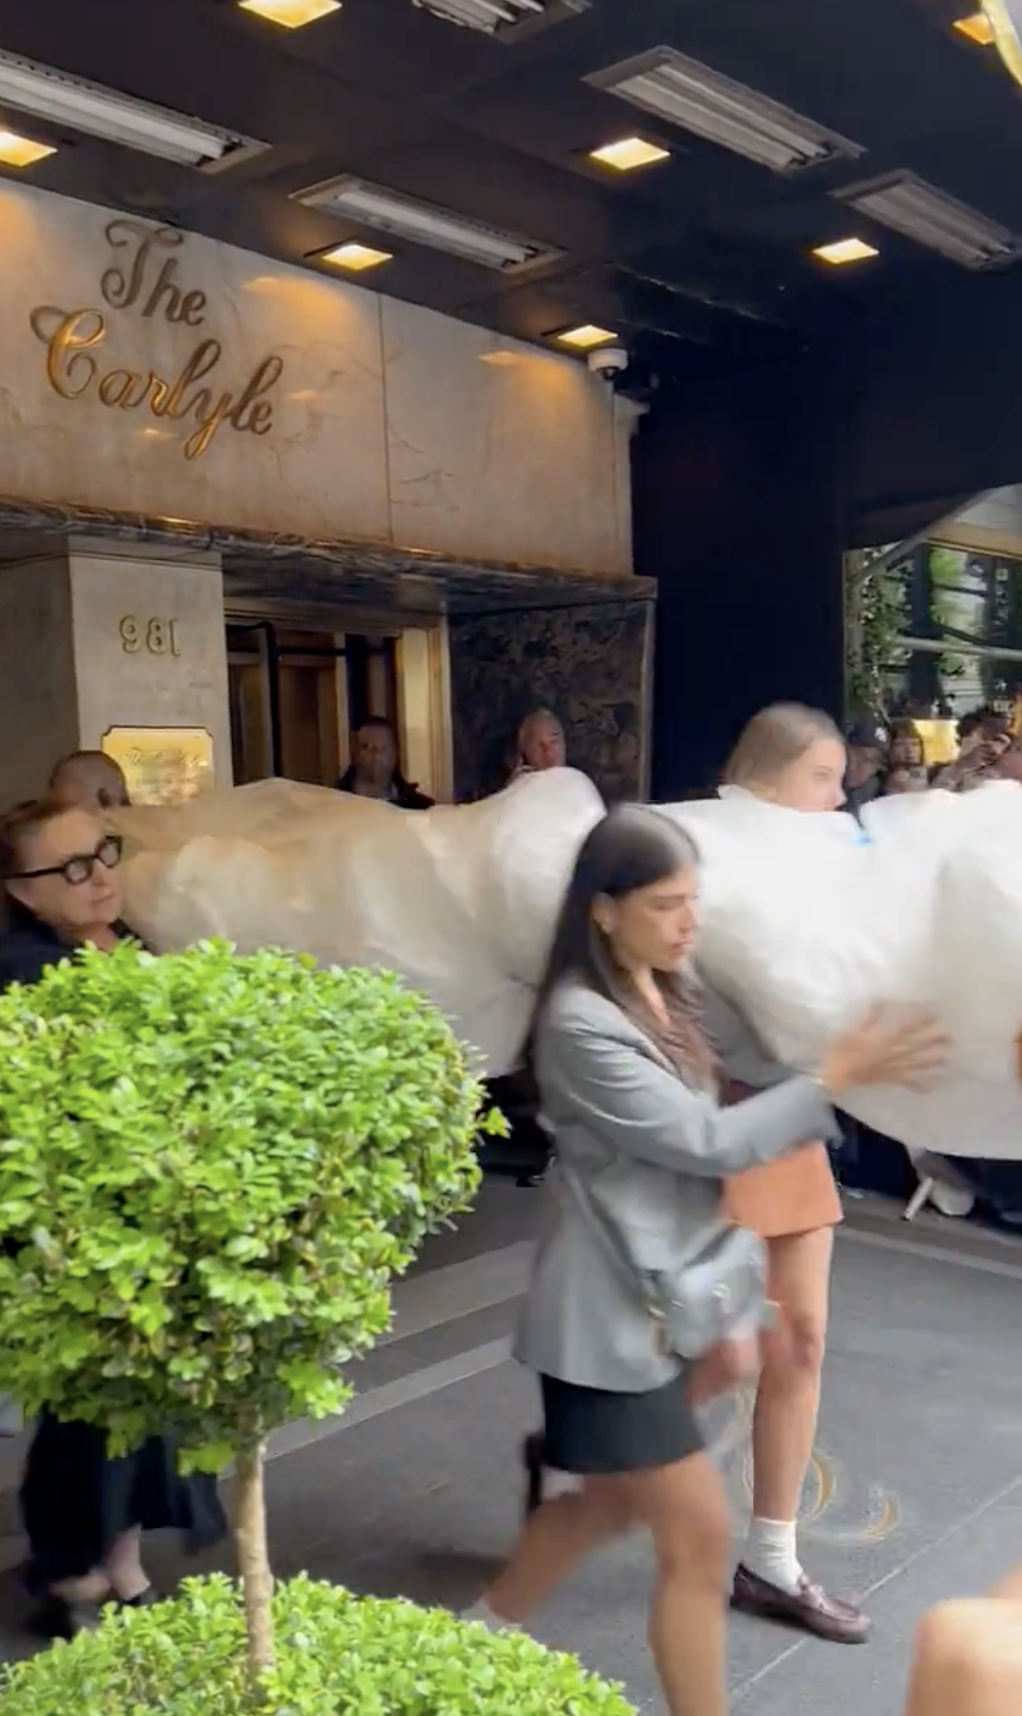 Screenshot from a video of people carrying something out of the Carlyle